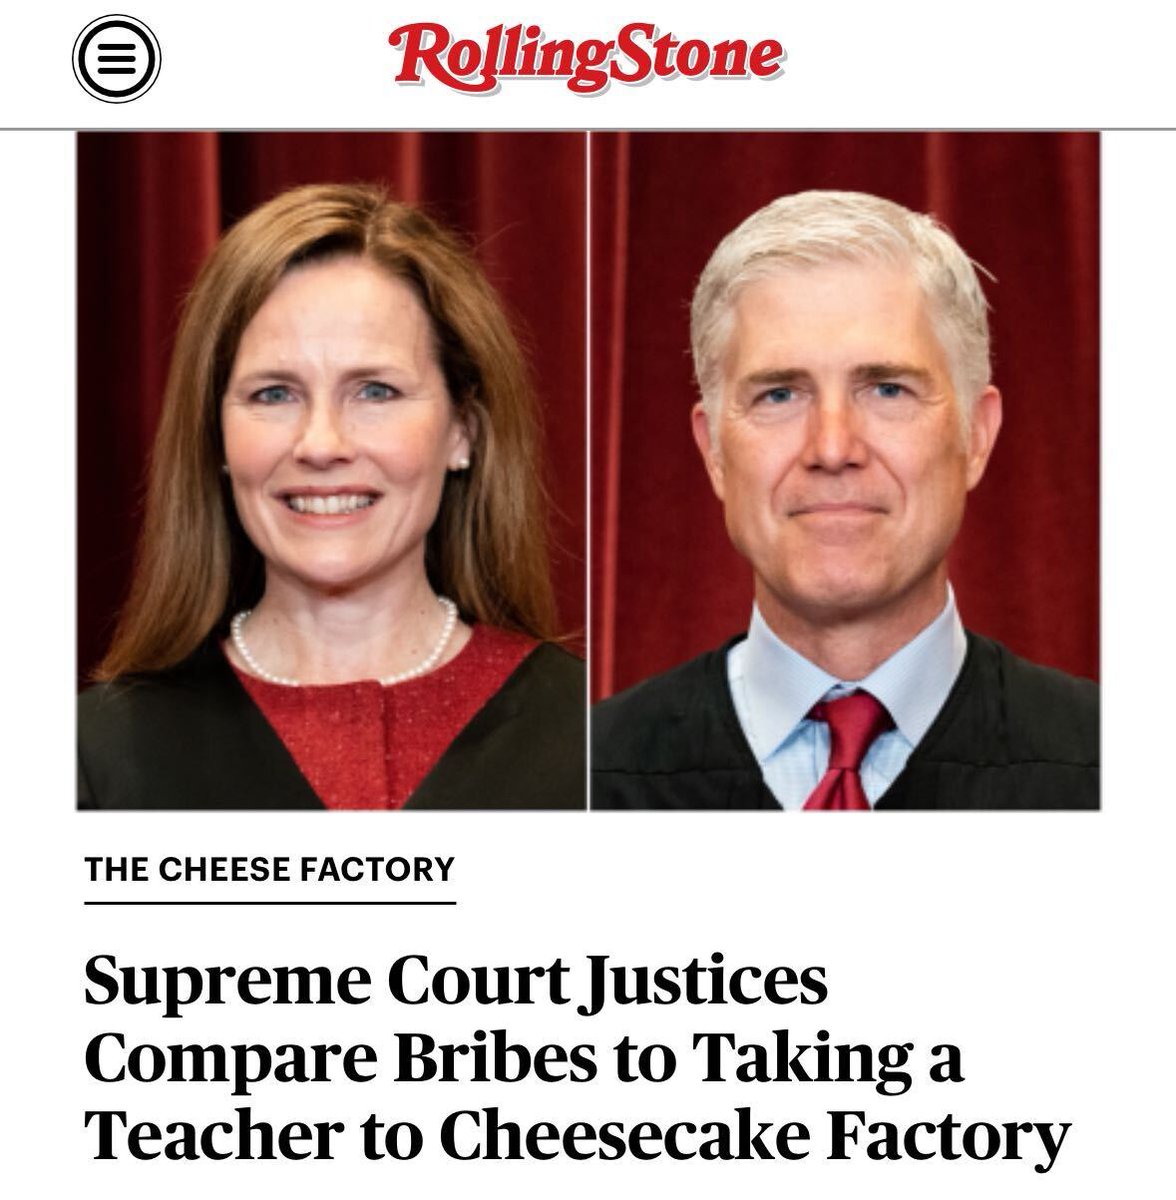 The Supreme Court, amid an unprecedented crisis of legitimacy pertaining to unreported gifts to justices, debated on Monday whether a contractor making a $13,000 gratuity to a politician is similar to taking a teacher to the Cheesecake Factory.

More: rollingstone.com/politics/polit…